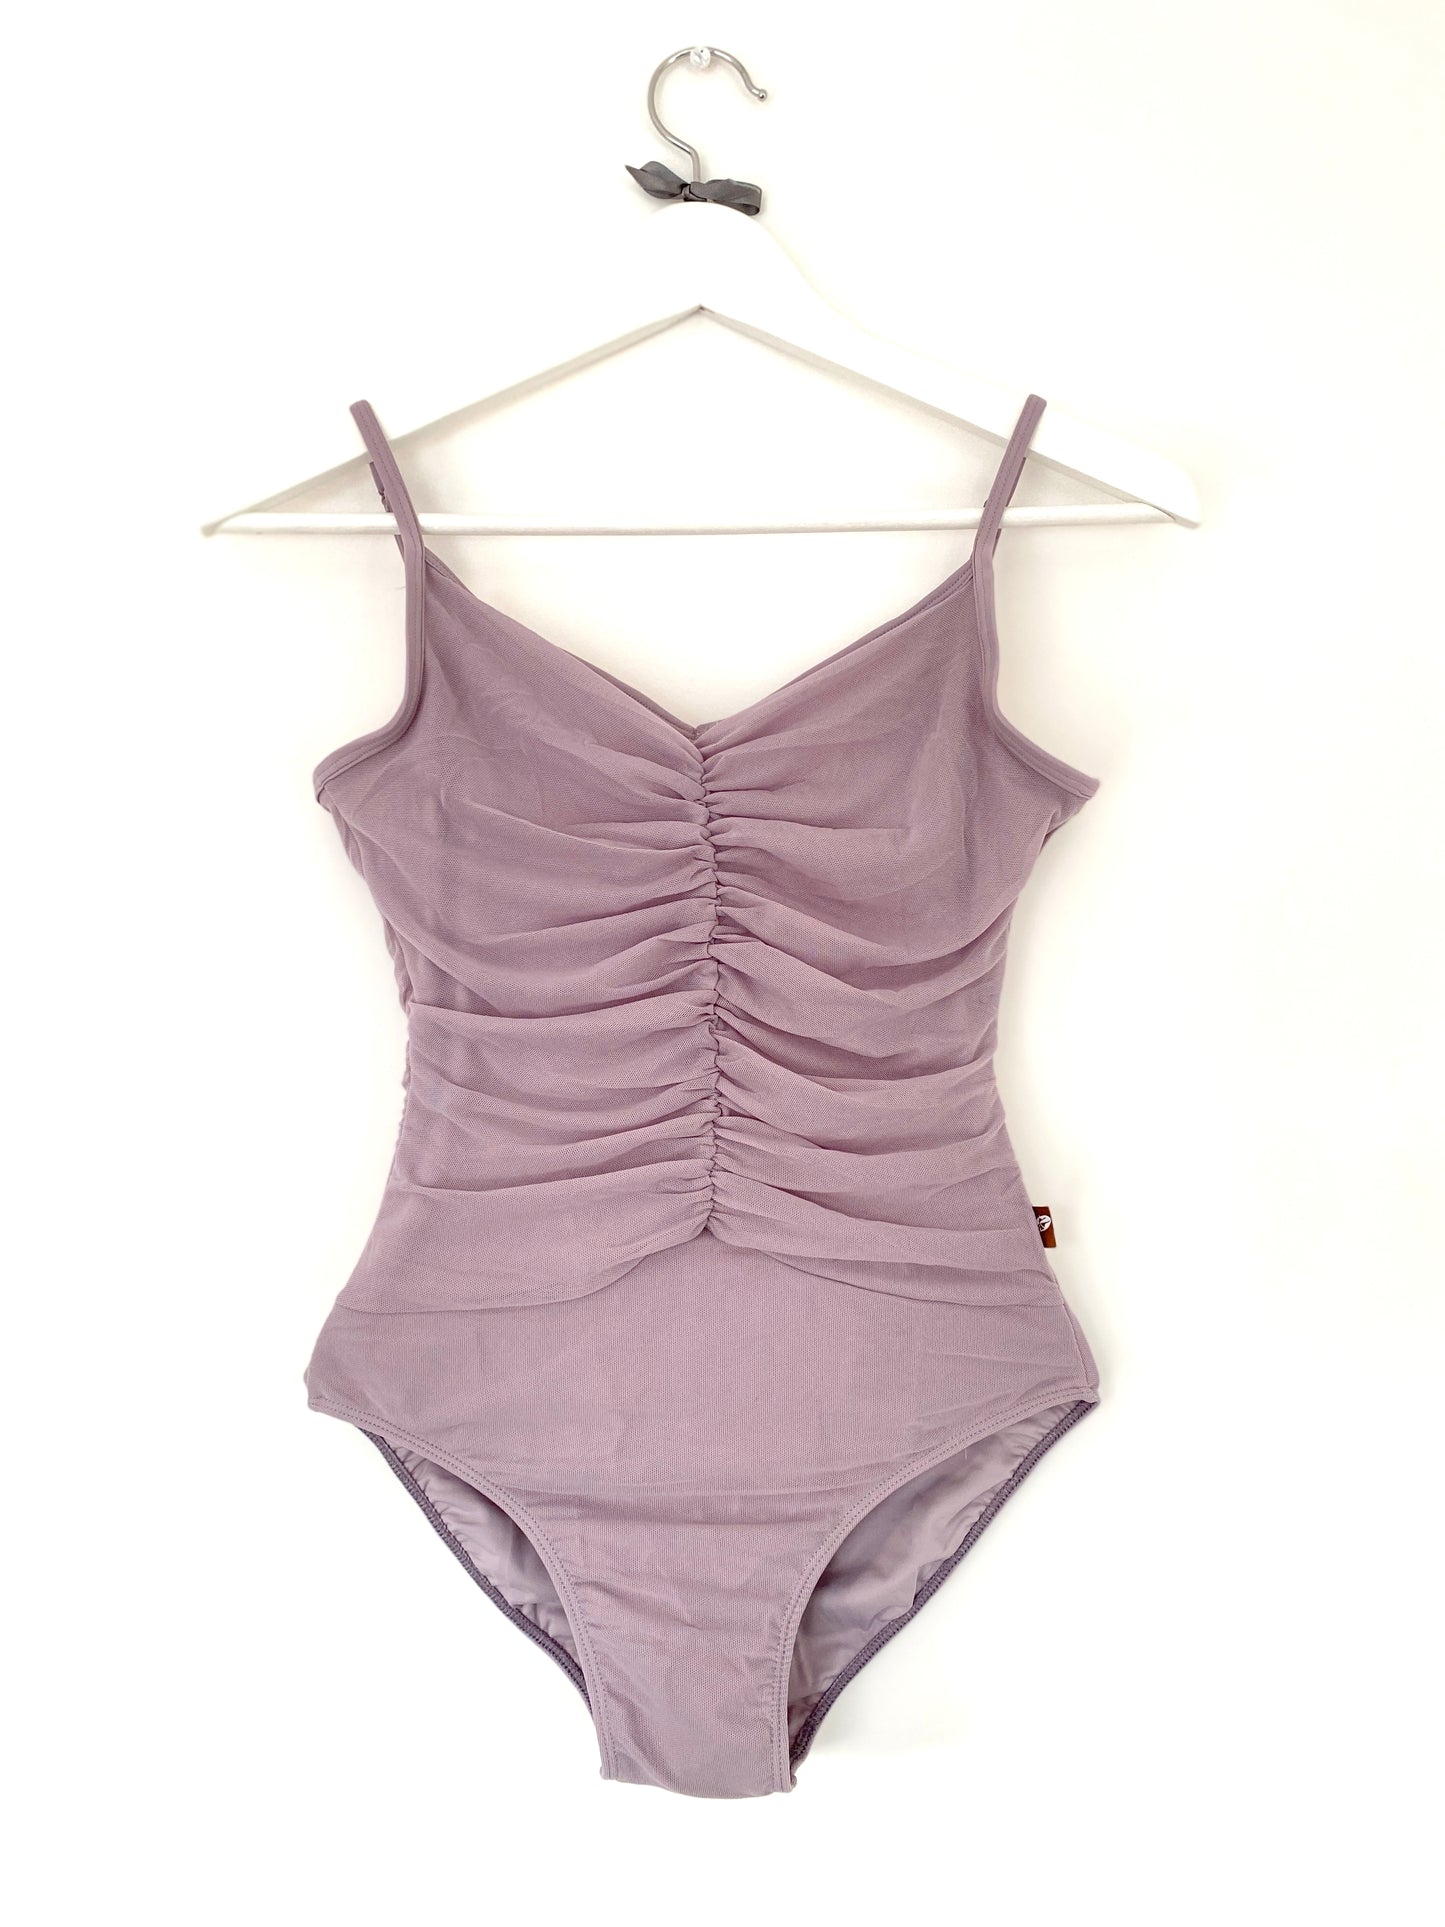 Gathered Mesh Leotard in dusky purple for dance from The Collective Dancewear